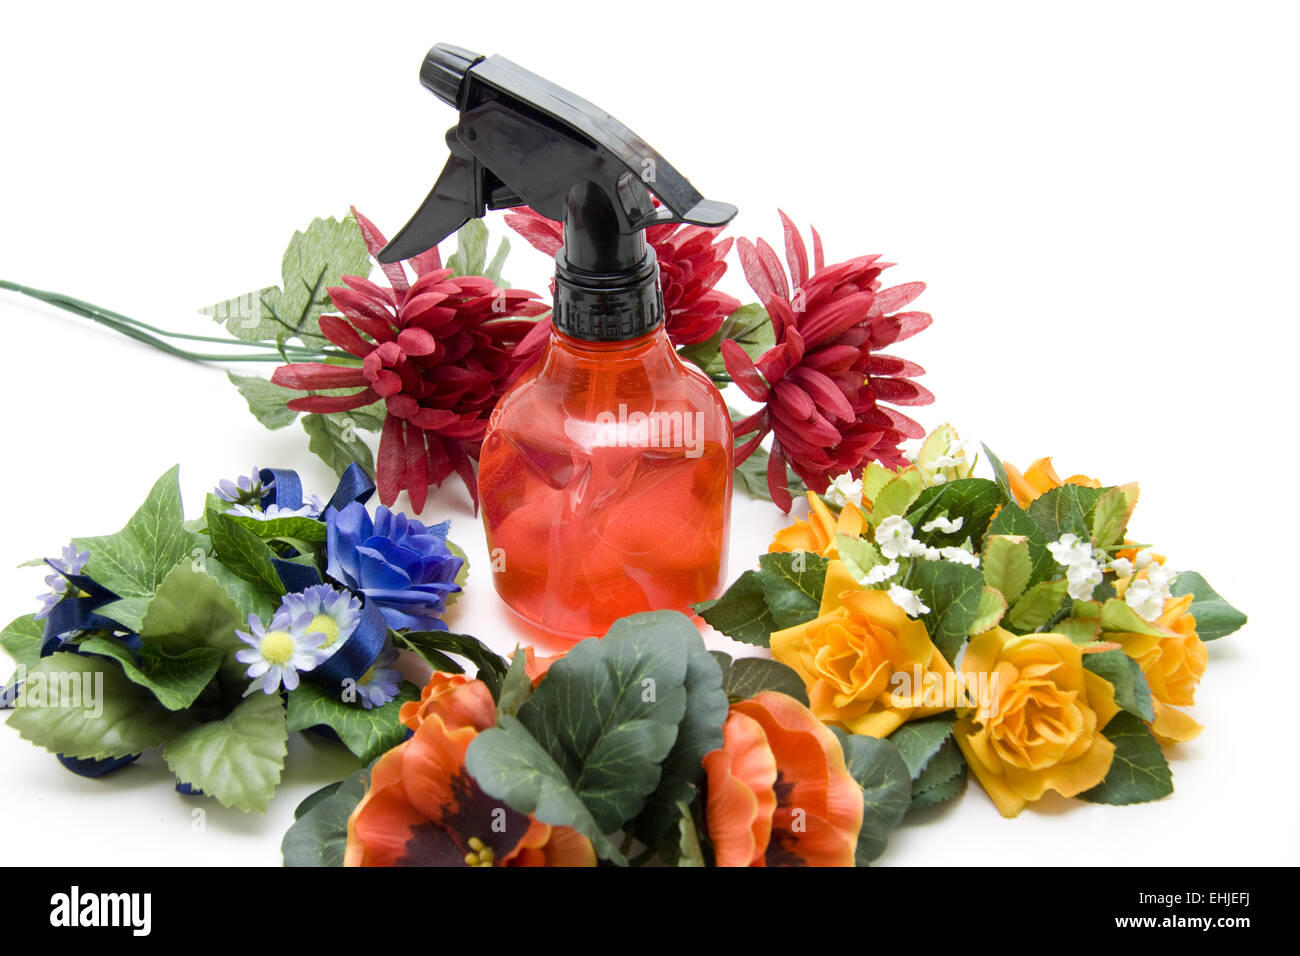 Spray bottle with flowers Stock Photo